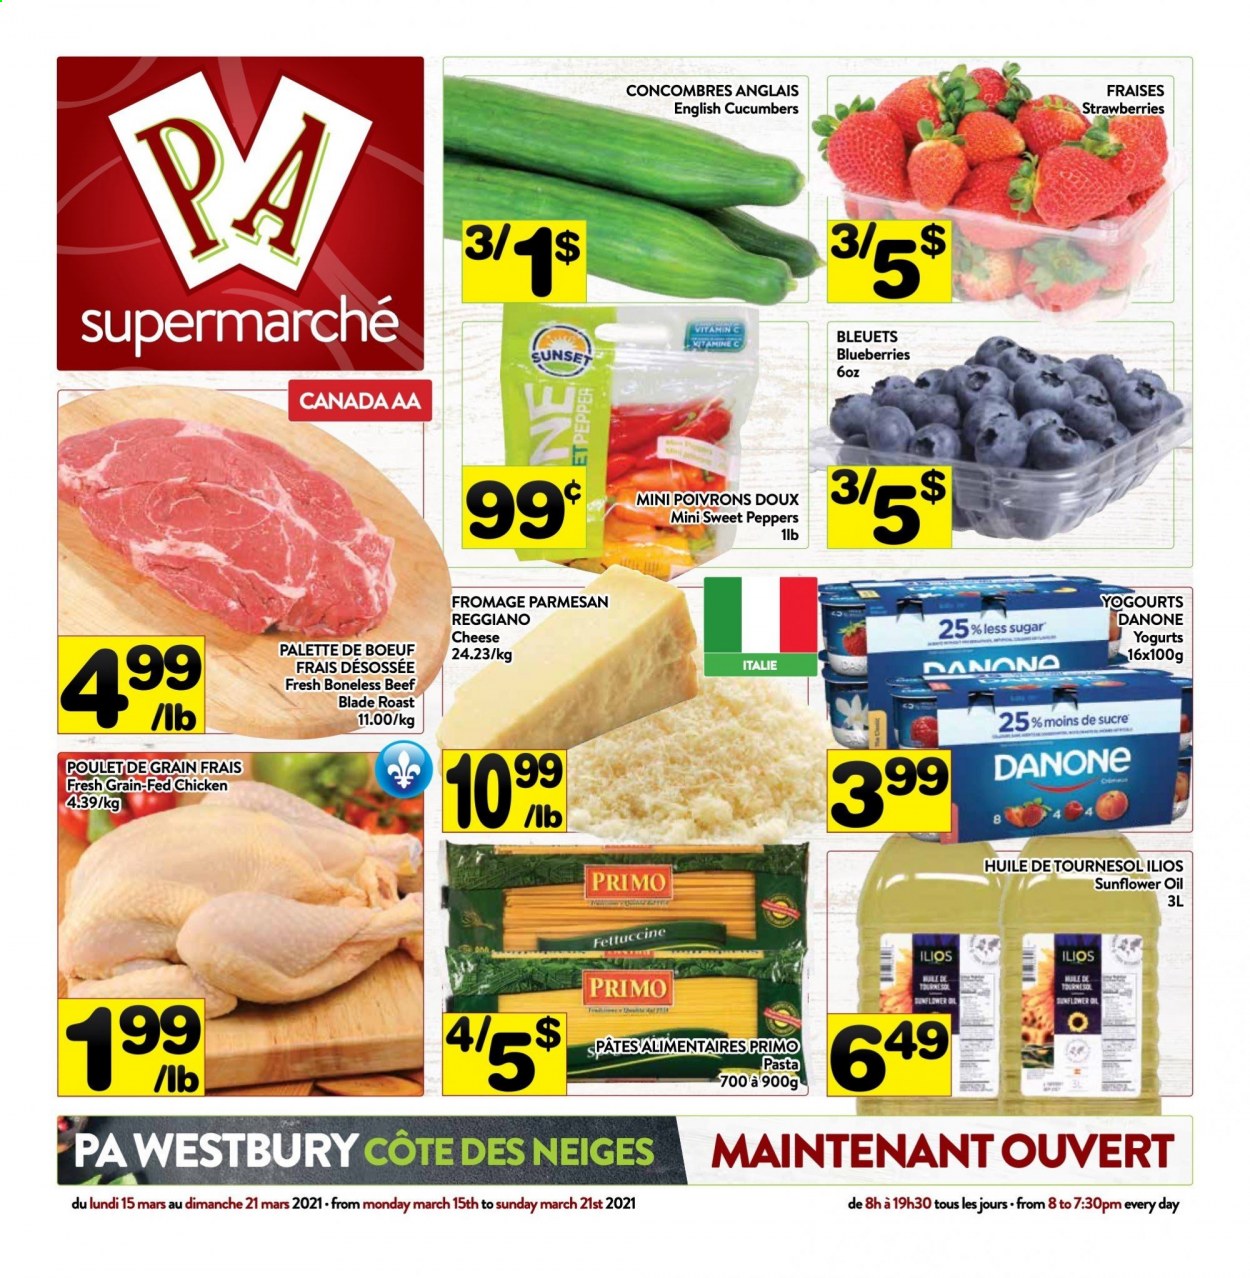 thumbnail - PA Supermarché Flyer - March 15, 2021 - March 21, 2021 - Sales products - cucumber, sweet peppers, peppers, blueberries, strawberries, pasta, parmesan, cheese, Mars, pepper, sunflower oil, oil, Danone. Page 1.